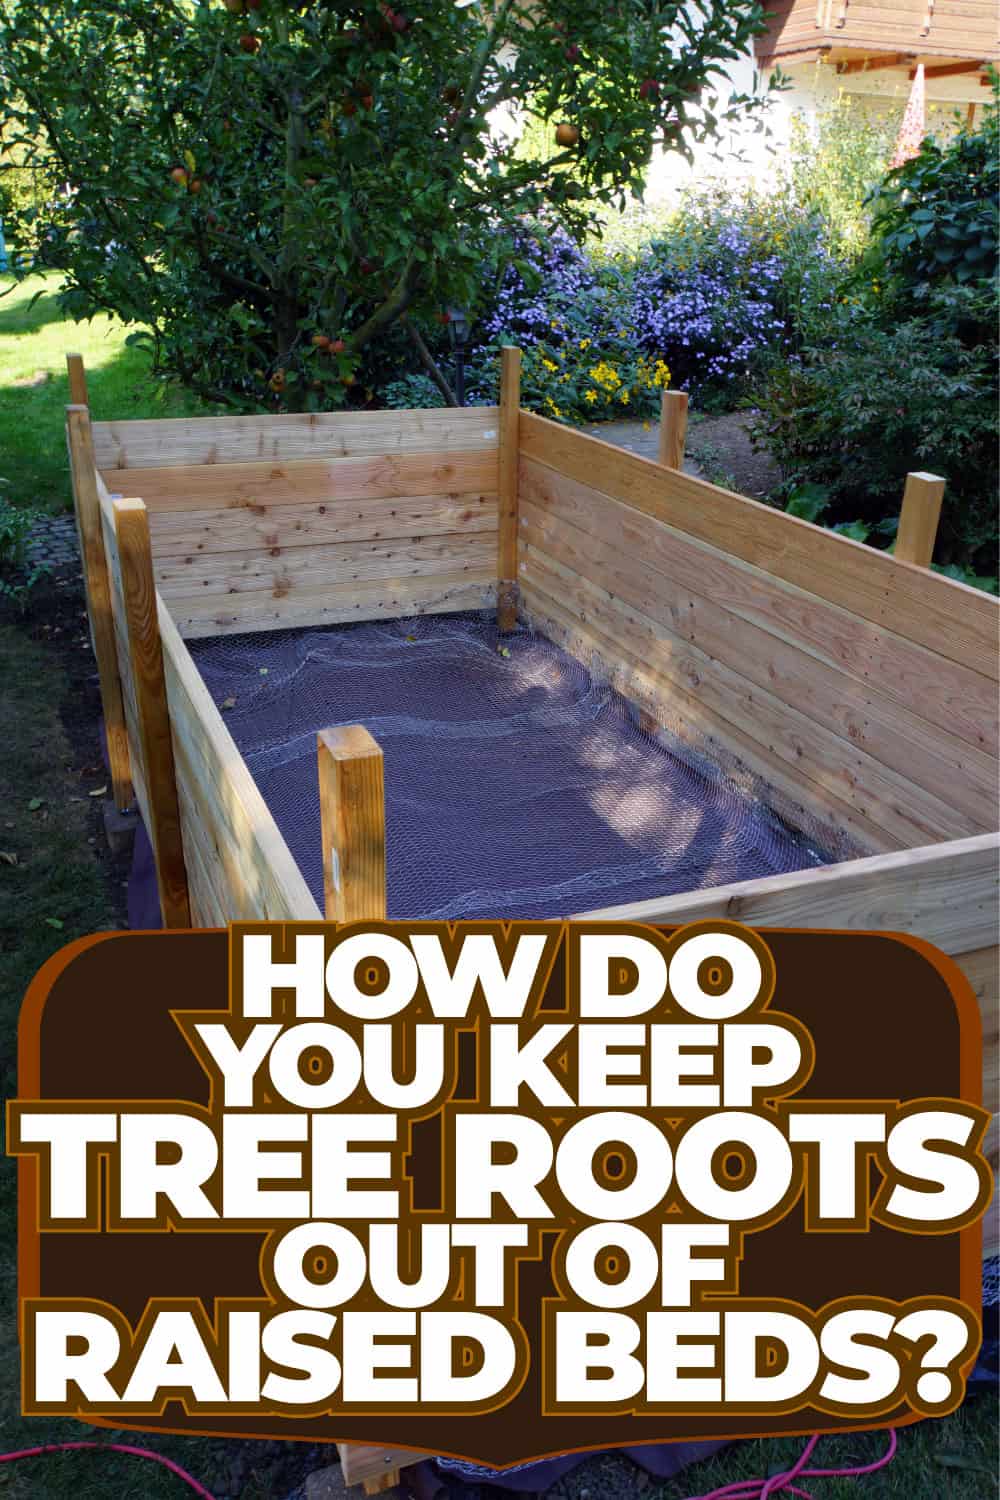 How Do You Keep Tree Roots Out Of Raised Beds?